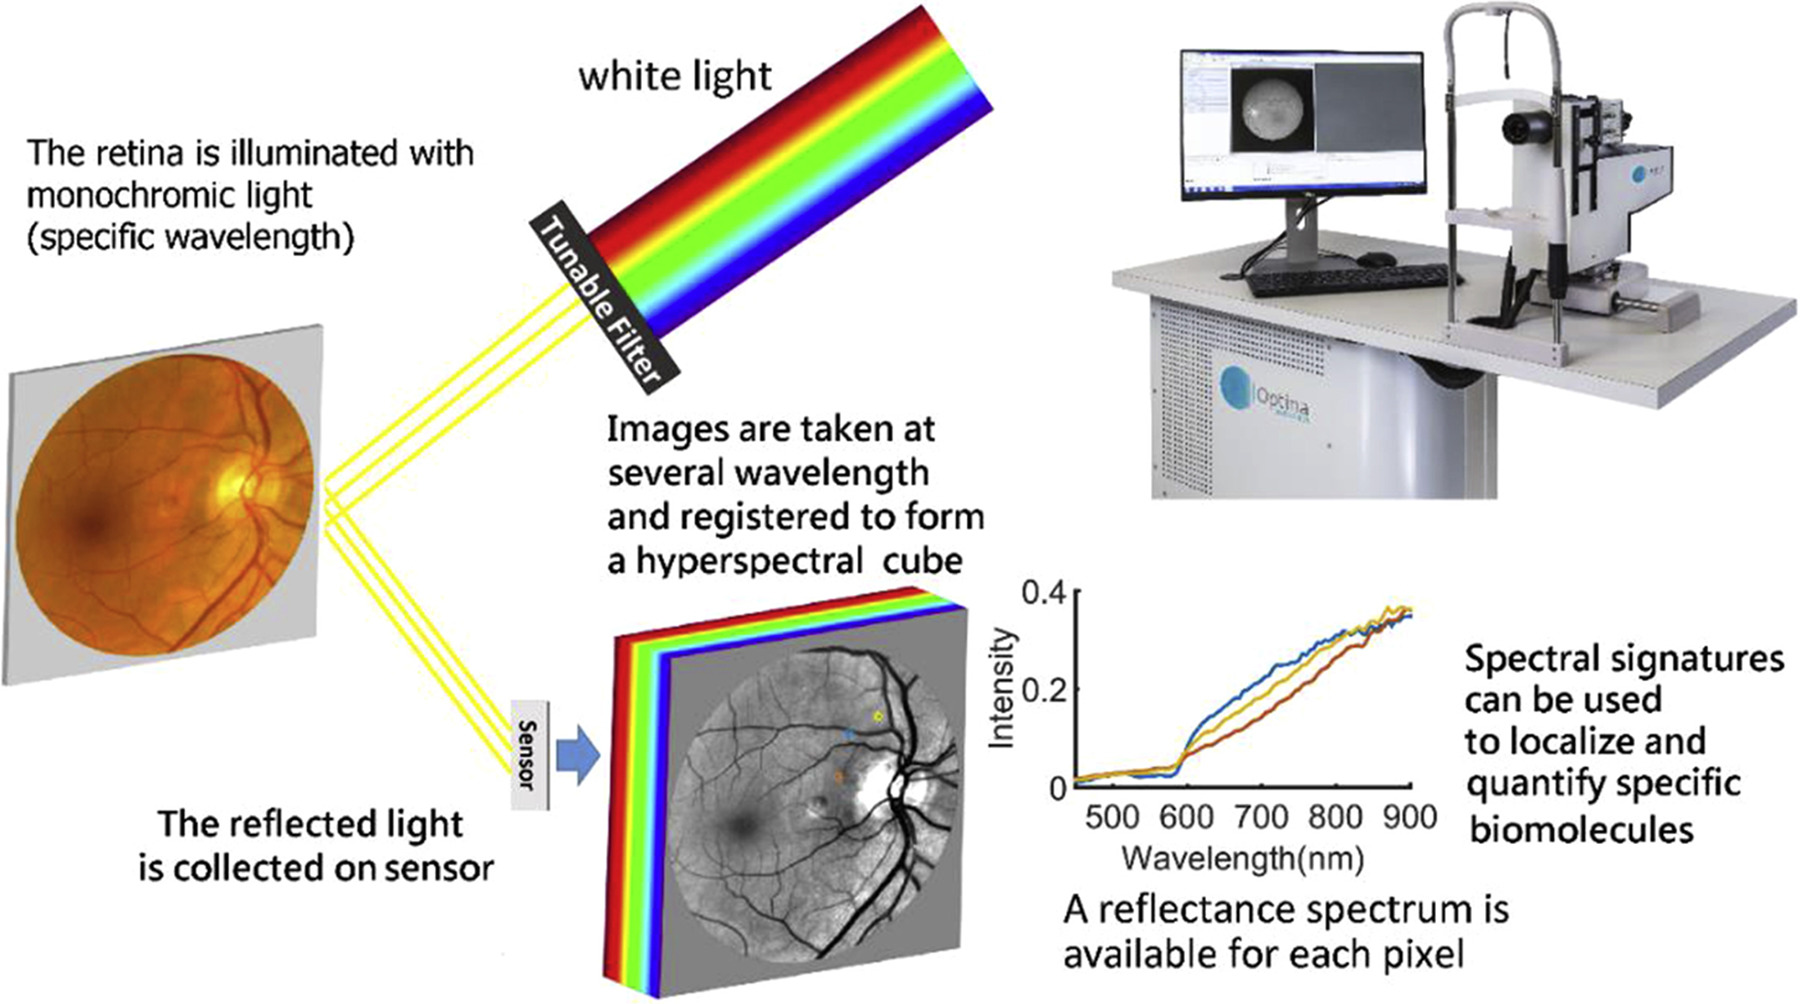 Hyperspectral imaging, though still impractical in a clinical setting, can detect the wavelength “signature” of amyloid beta in the retinas of Alzheimer’s patients.